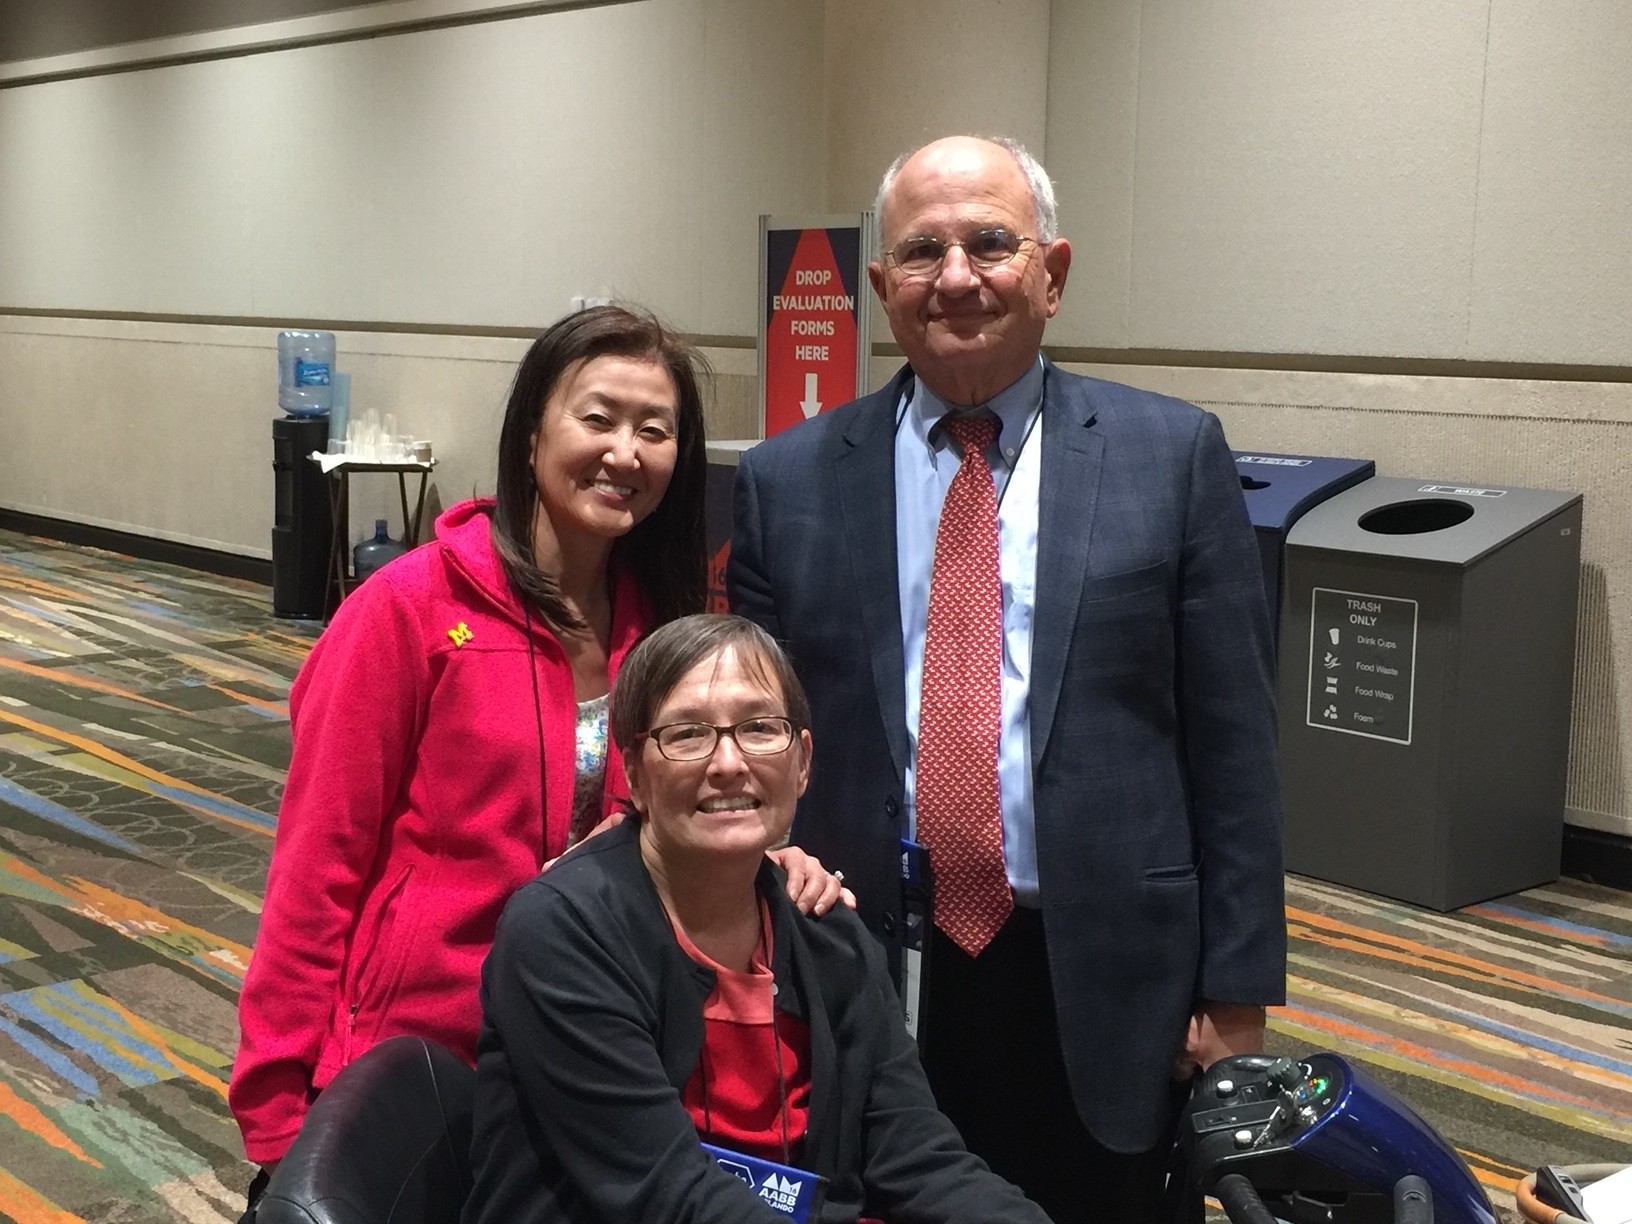 Dr. Chisa Yamada with mentors Drs. Paul Ness and Karen King